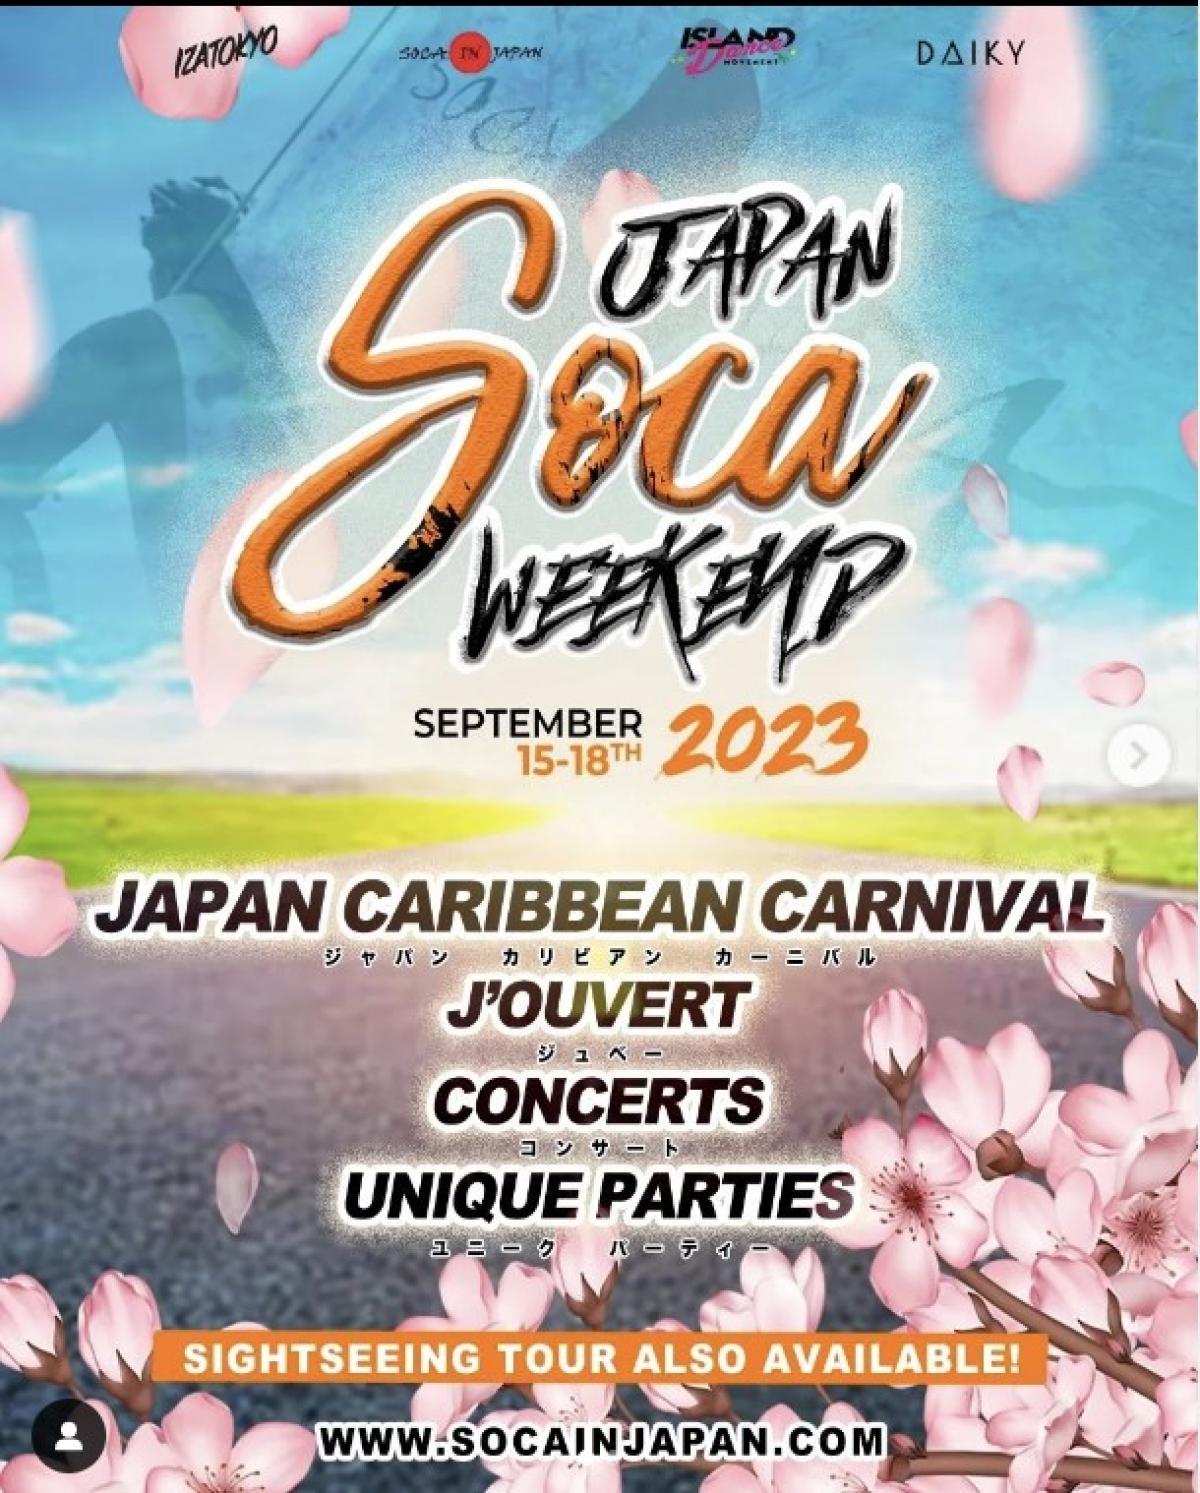 Soca In Japan flyer or graphic.